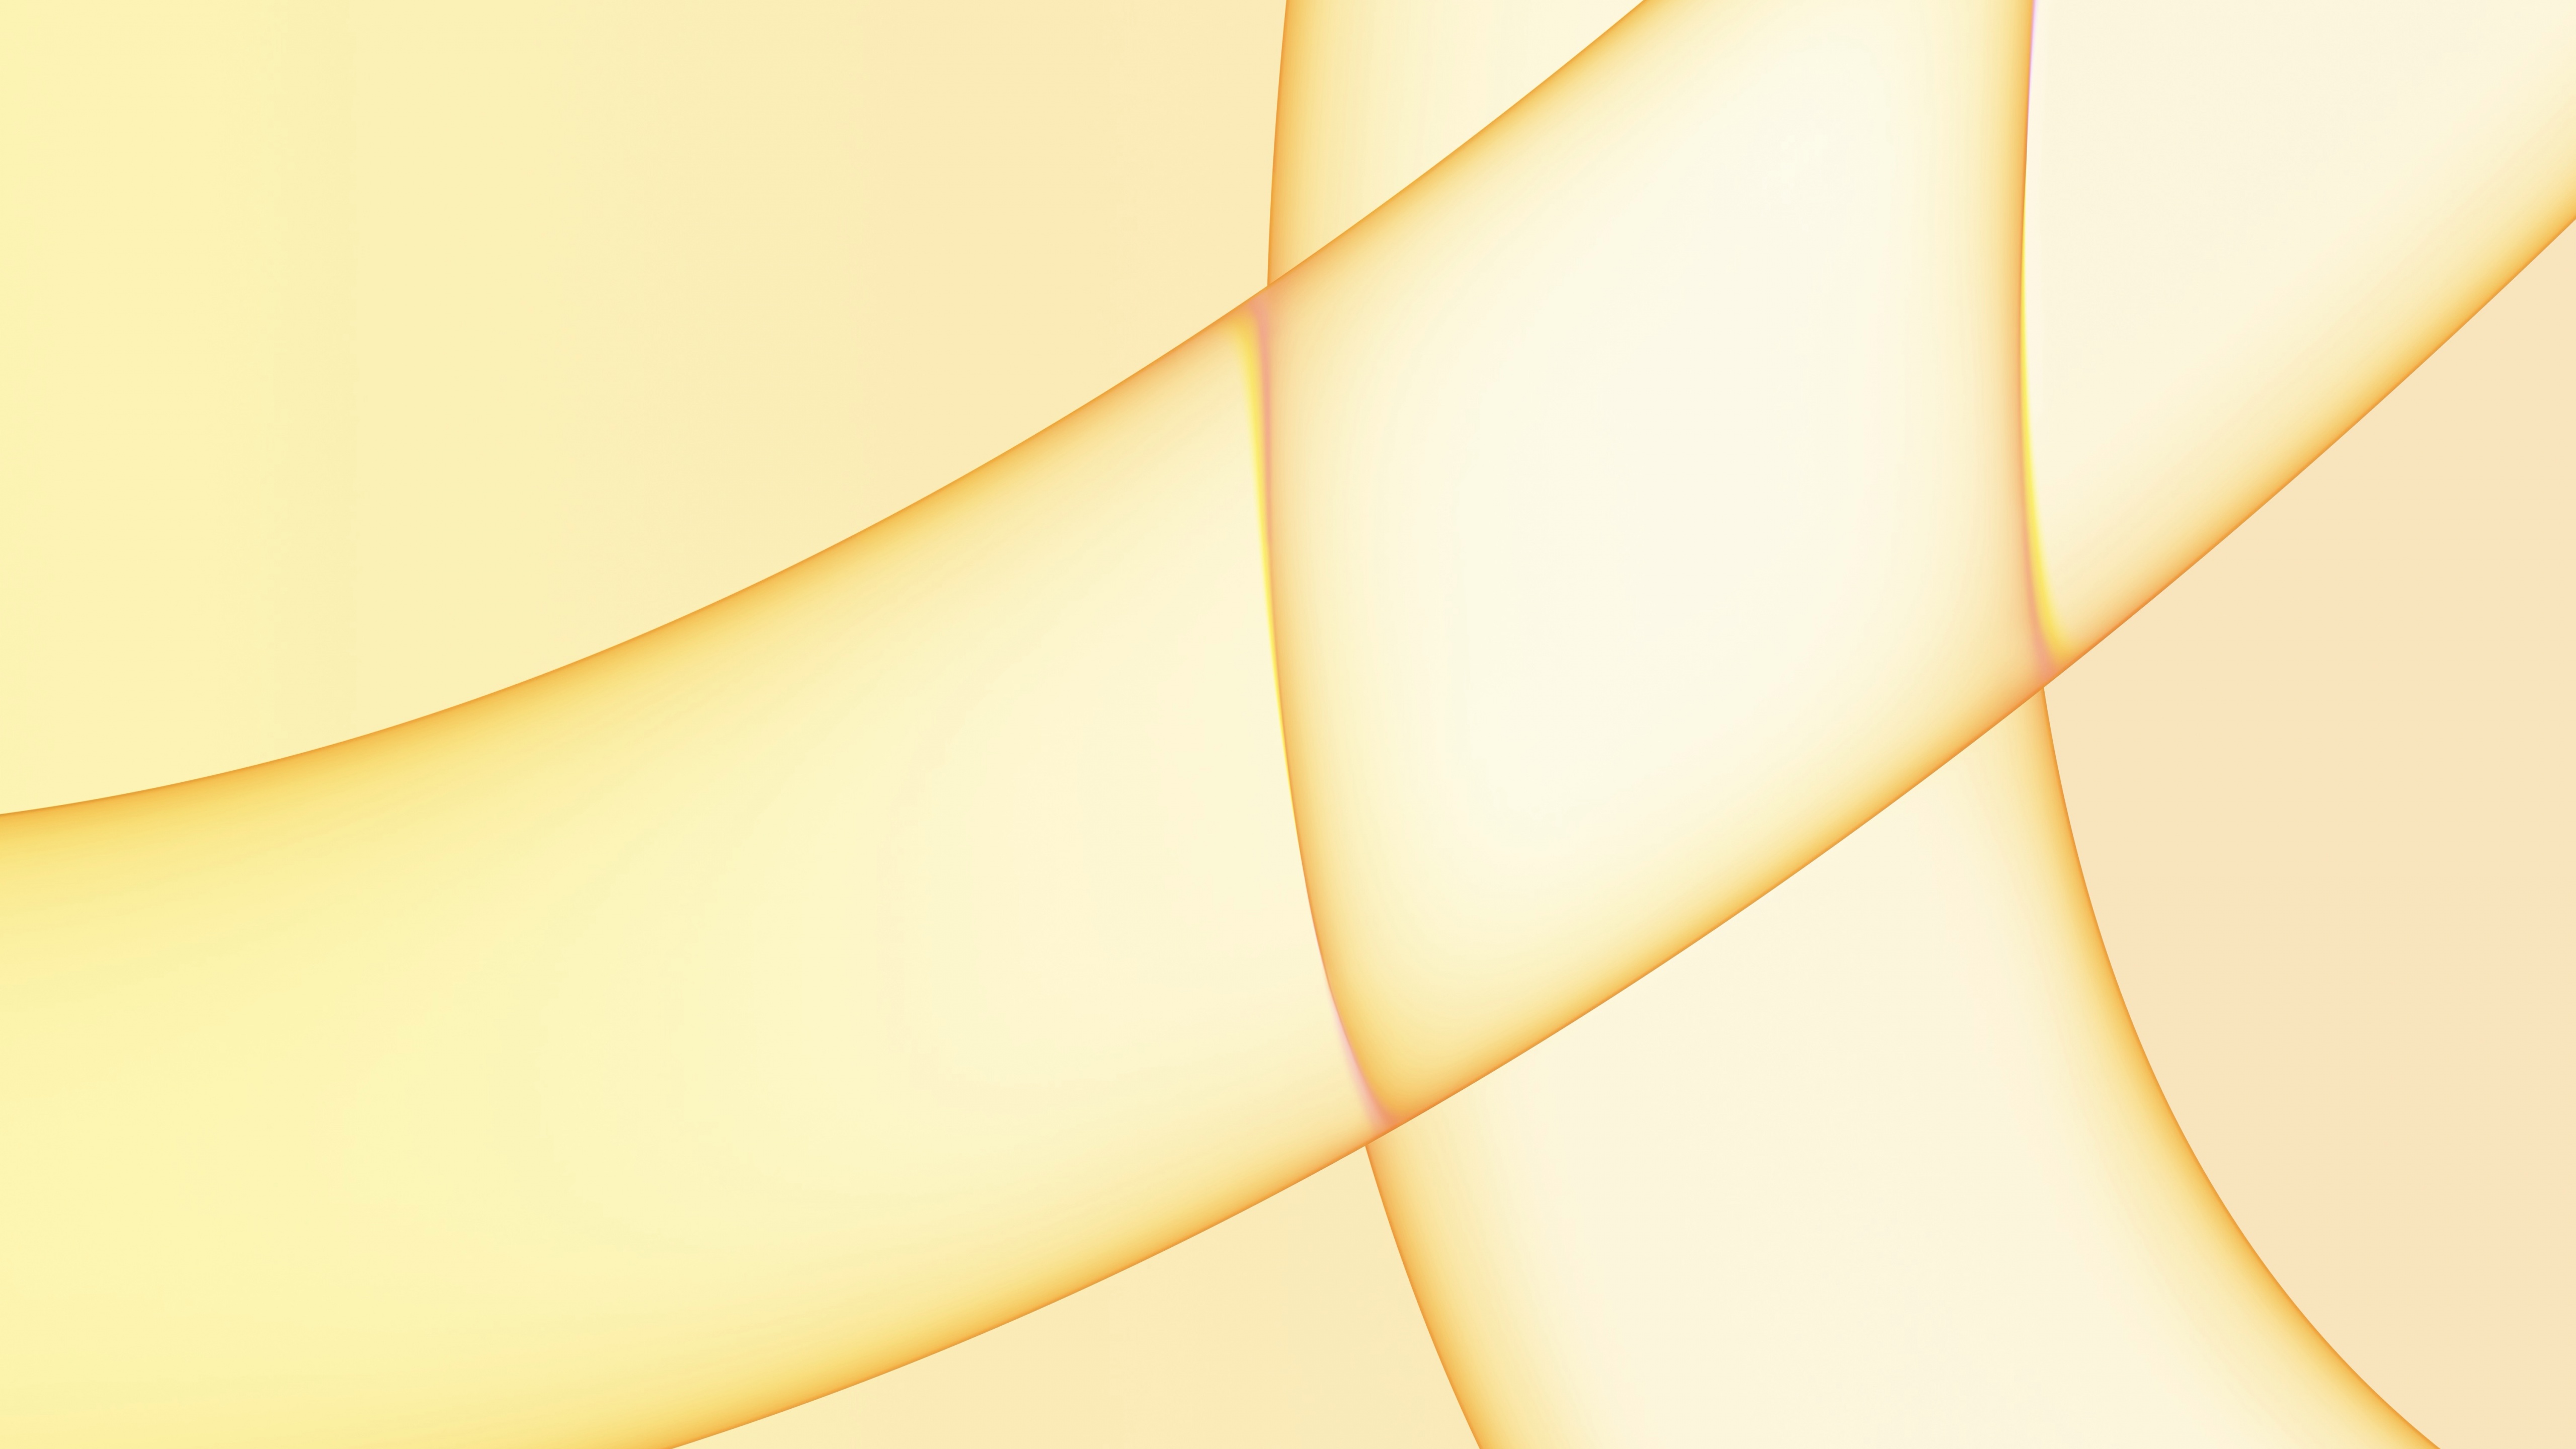 Imac 21 Wallpaper 4k Apple Event 21 Stock Yellow Background 5k Abstract 5248